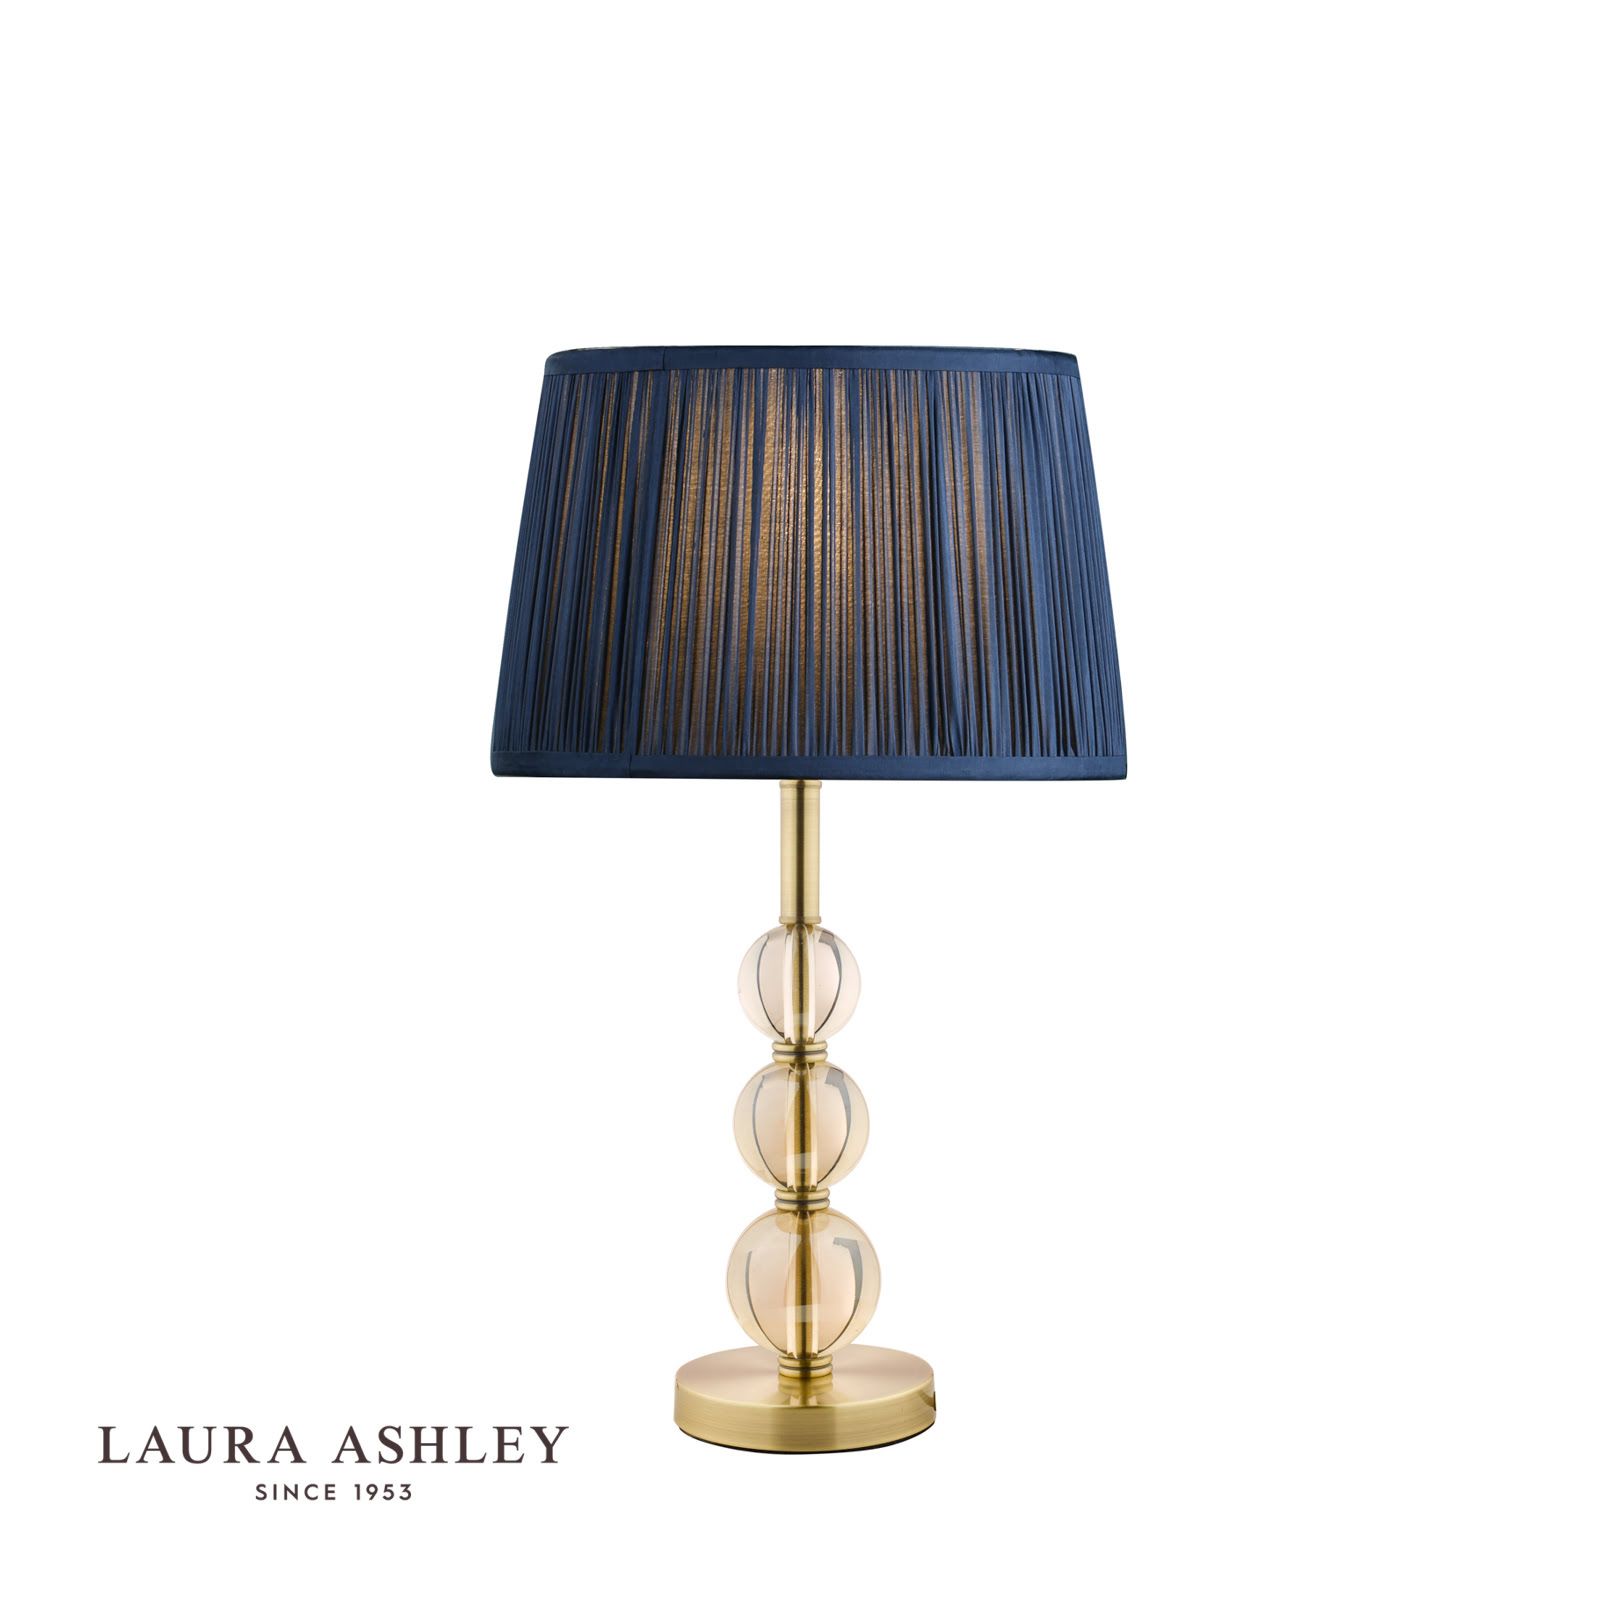 Laura Ashley Selby Antique Brass, Laura Ashley Brass Table Lamp